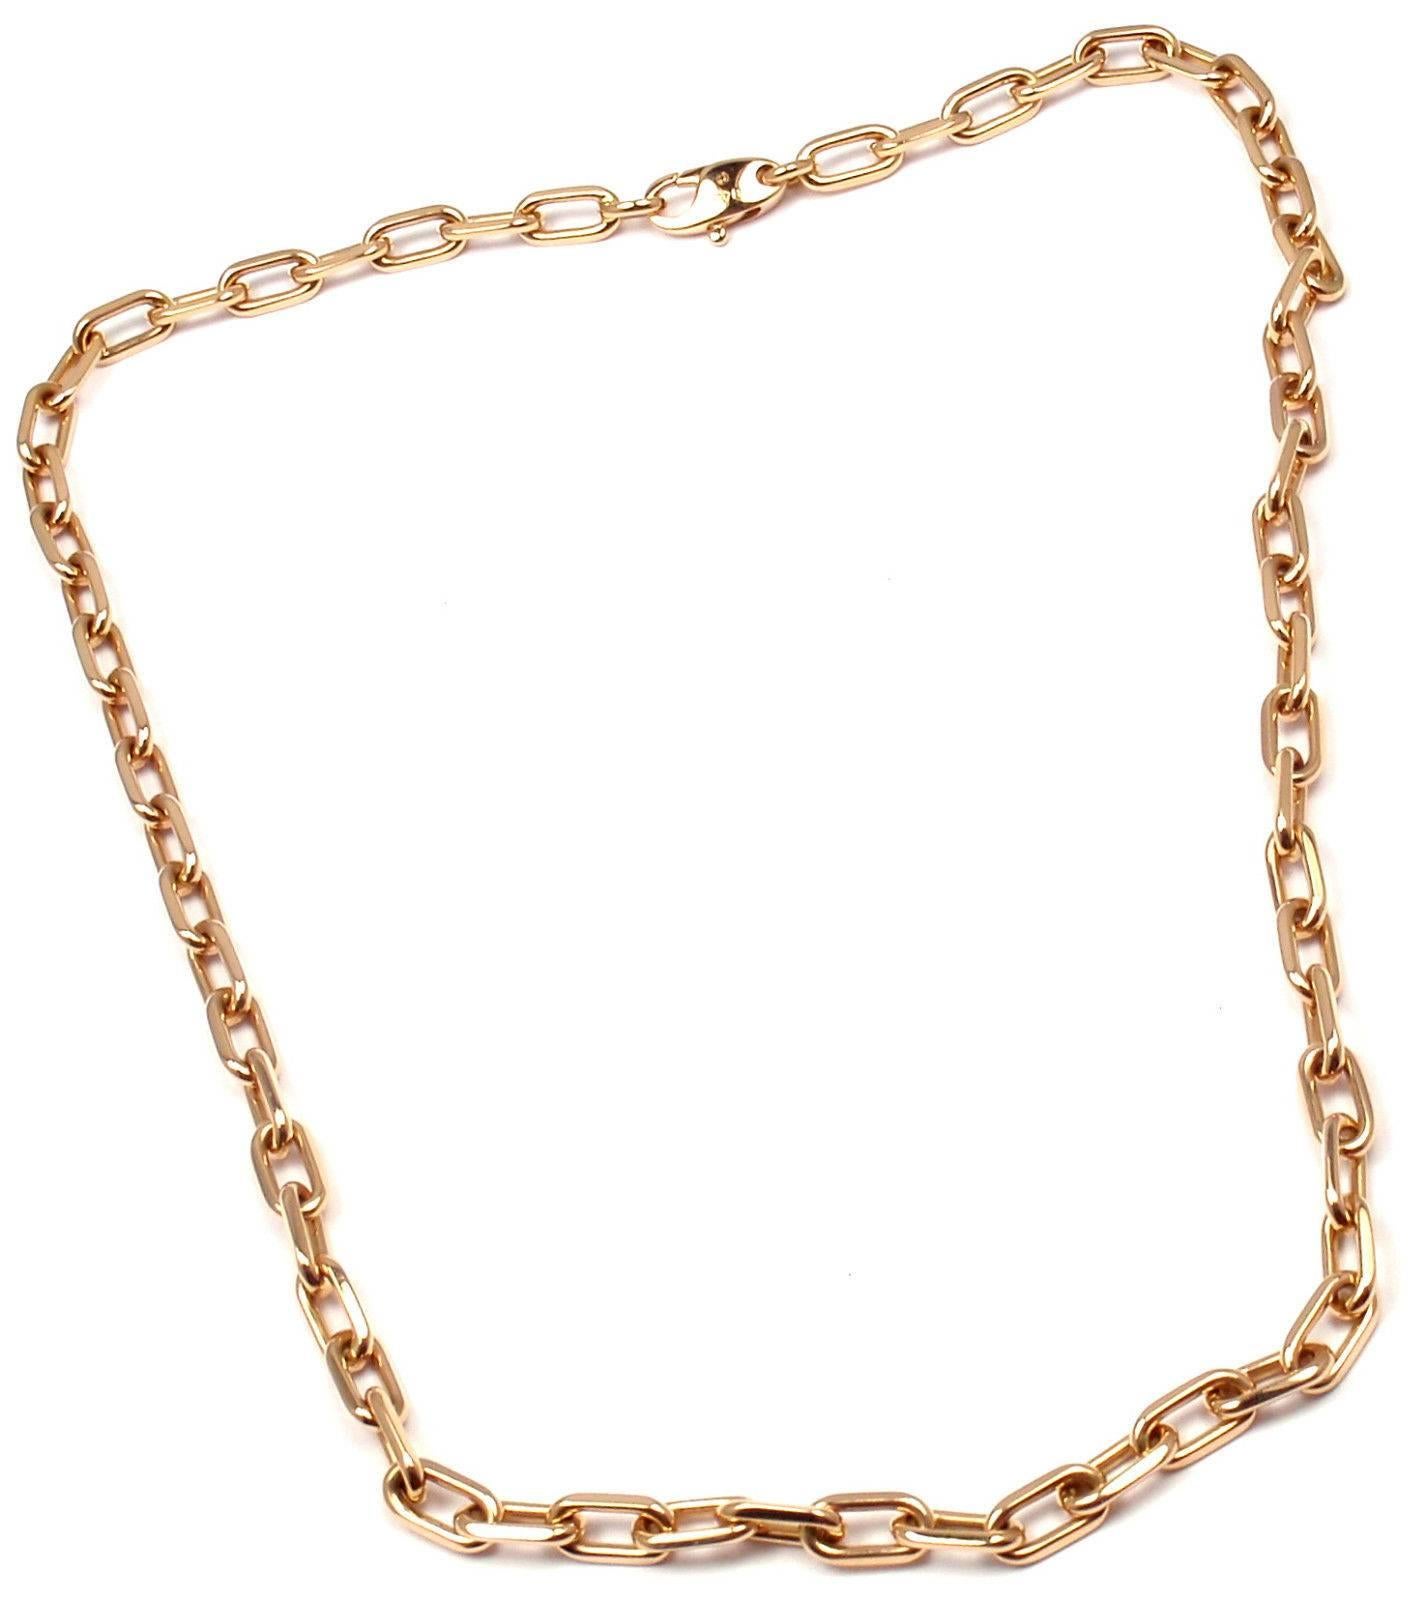 18k Rose Gold Santos-Dumont Link Chain Necklace by Cartier. 
This necklace comes with an original Cartier box.

Details: 
Length: 17